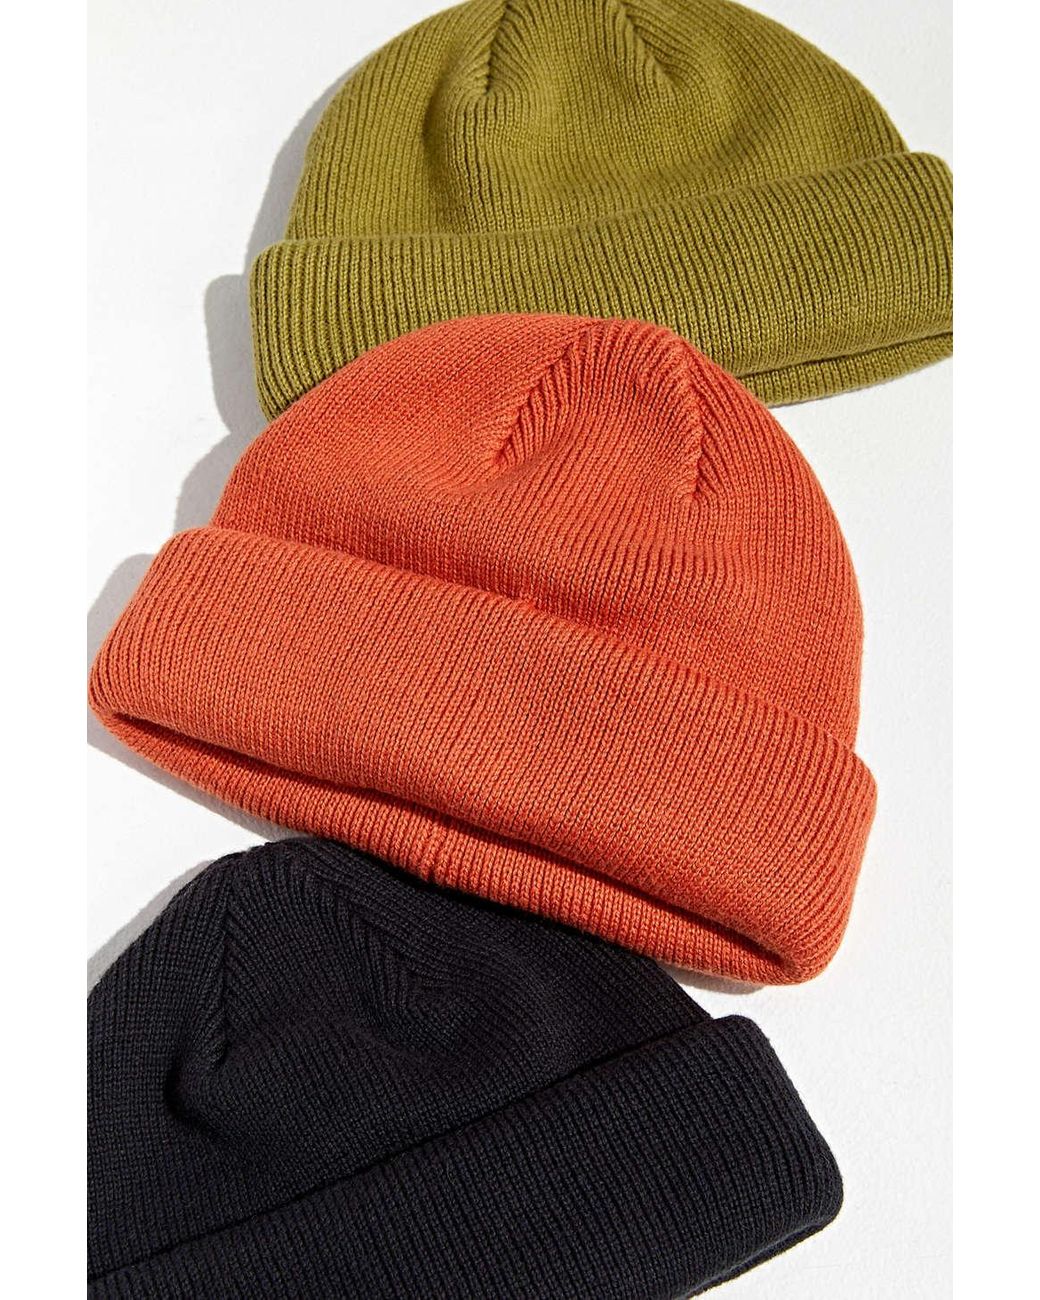 Urban Outfitters Uo Roll Beanie for Lyst